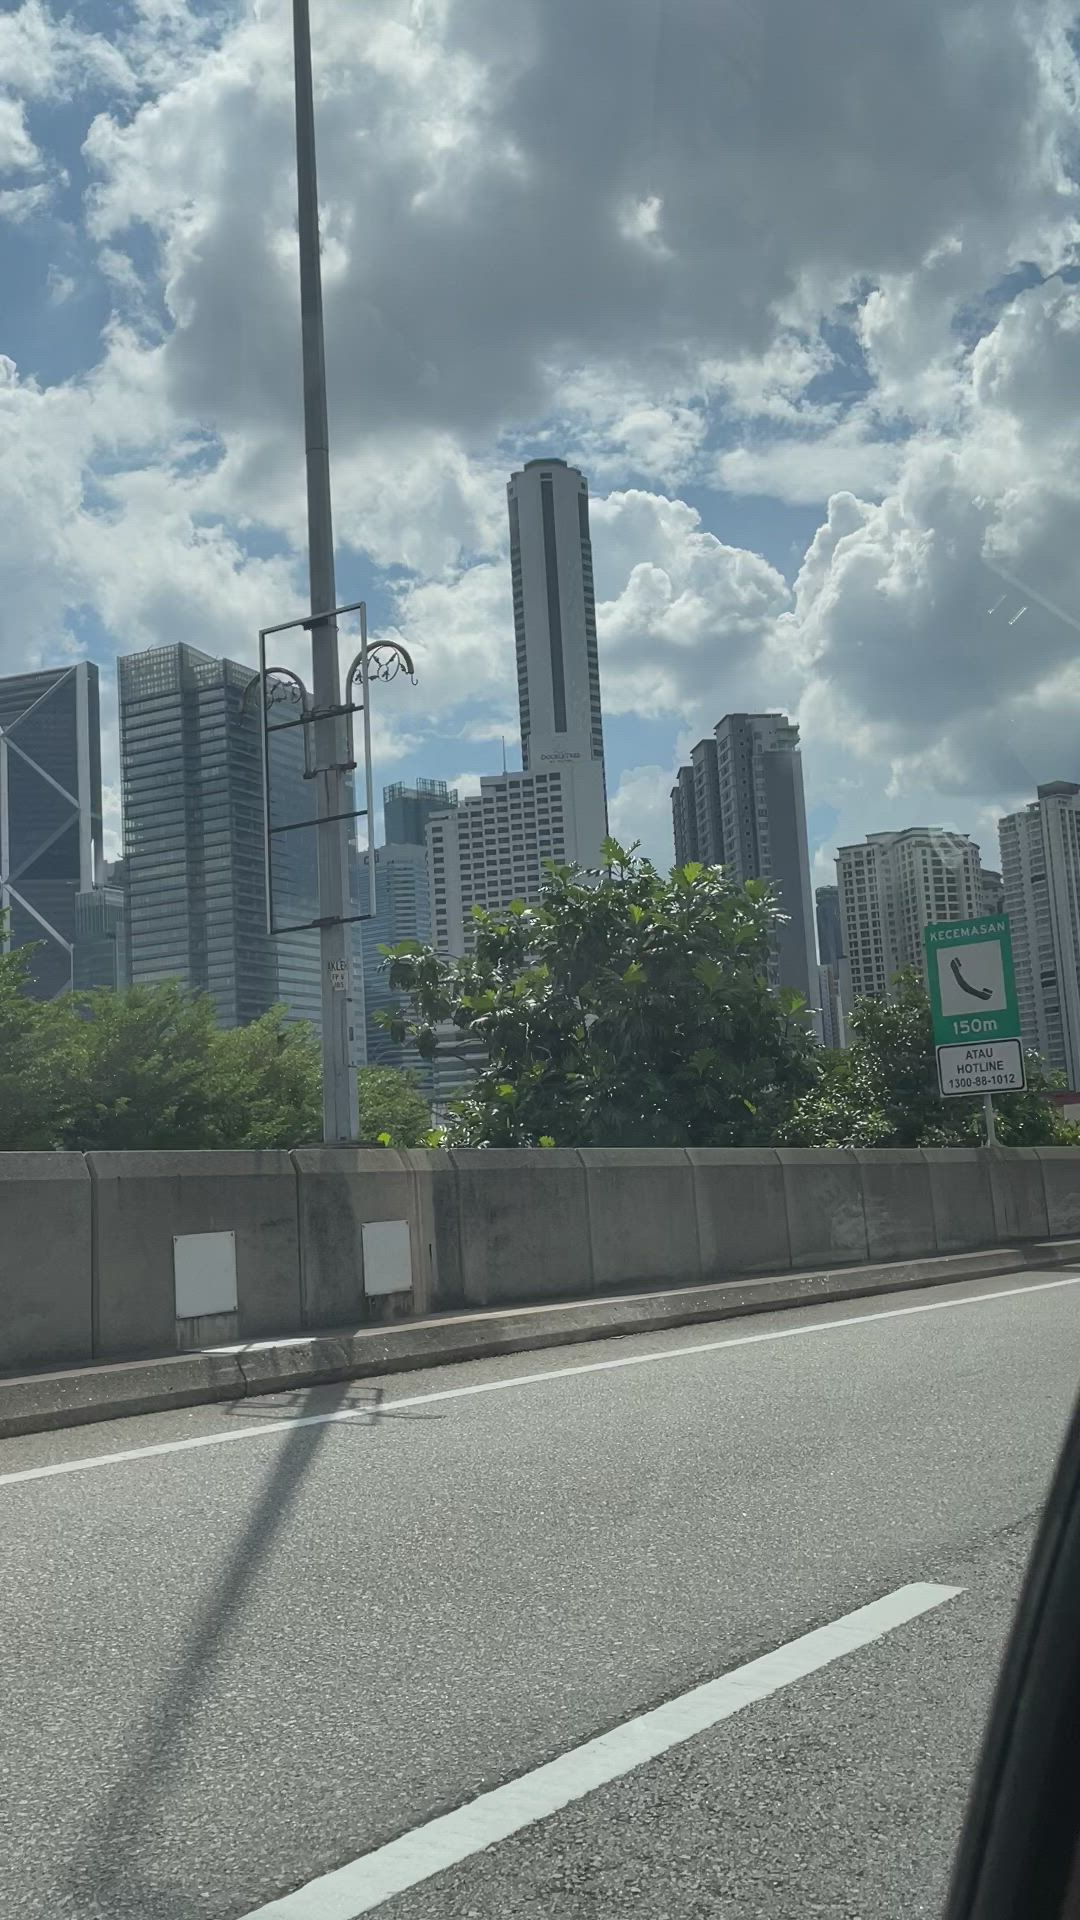 This may contain: the city skyline as seen from inside a car window, with clouds in the sky